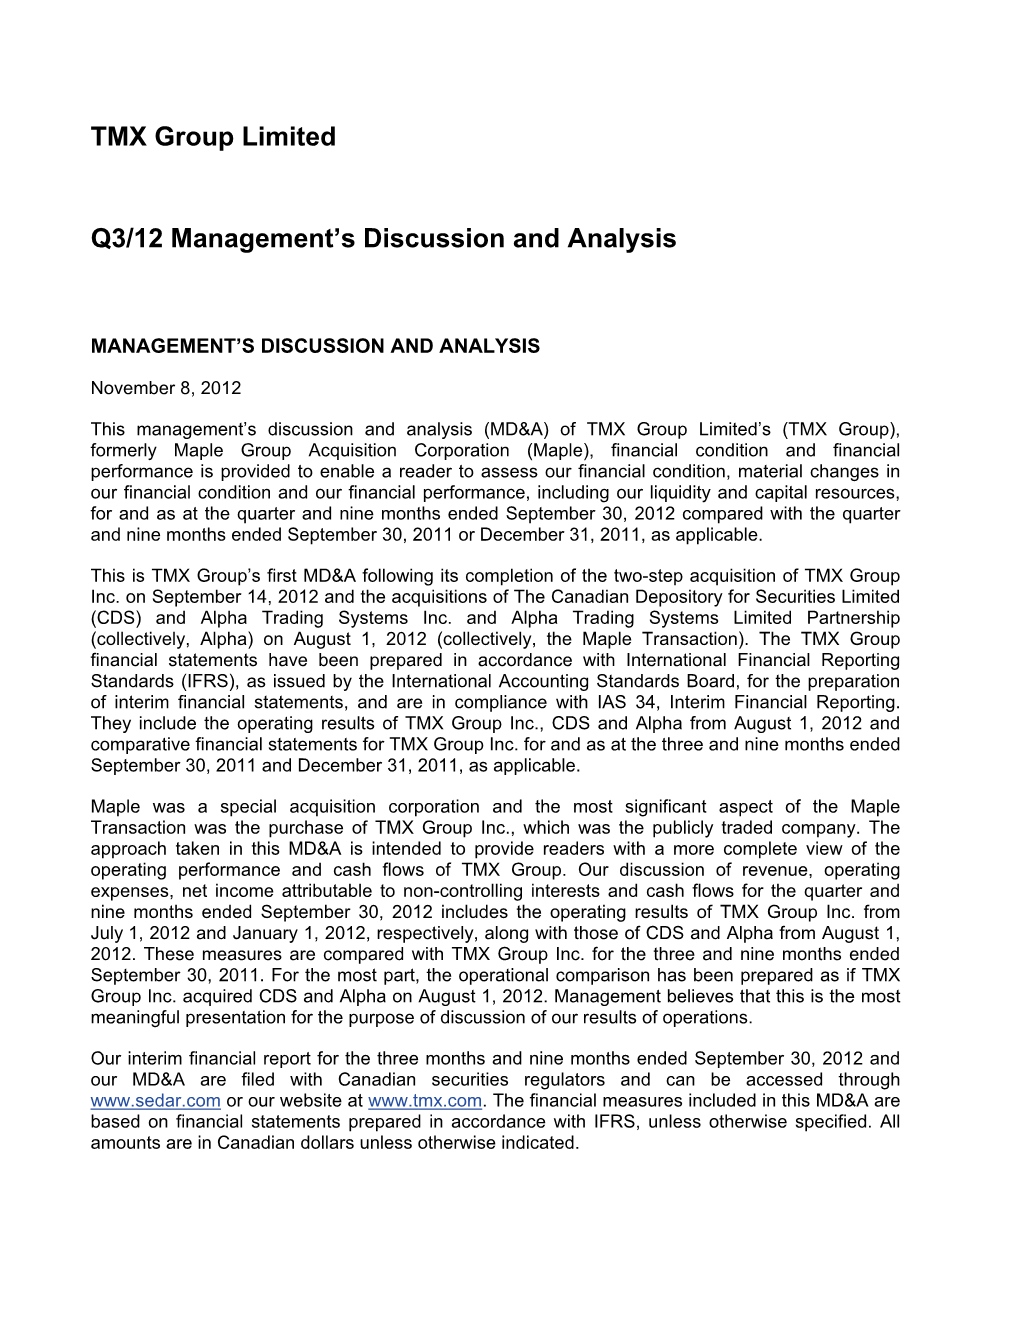 TMX Group Limited Q3/2012 Management's Discussion And